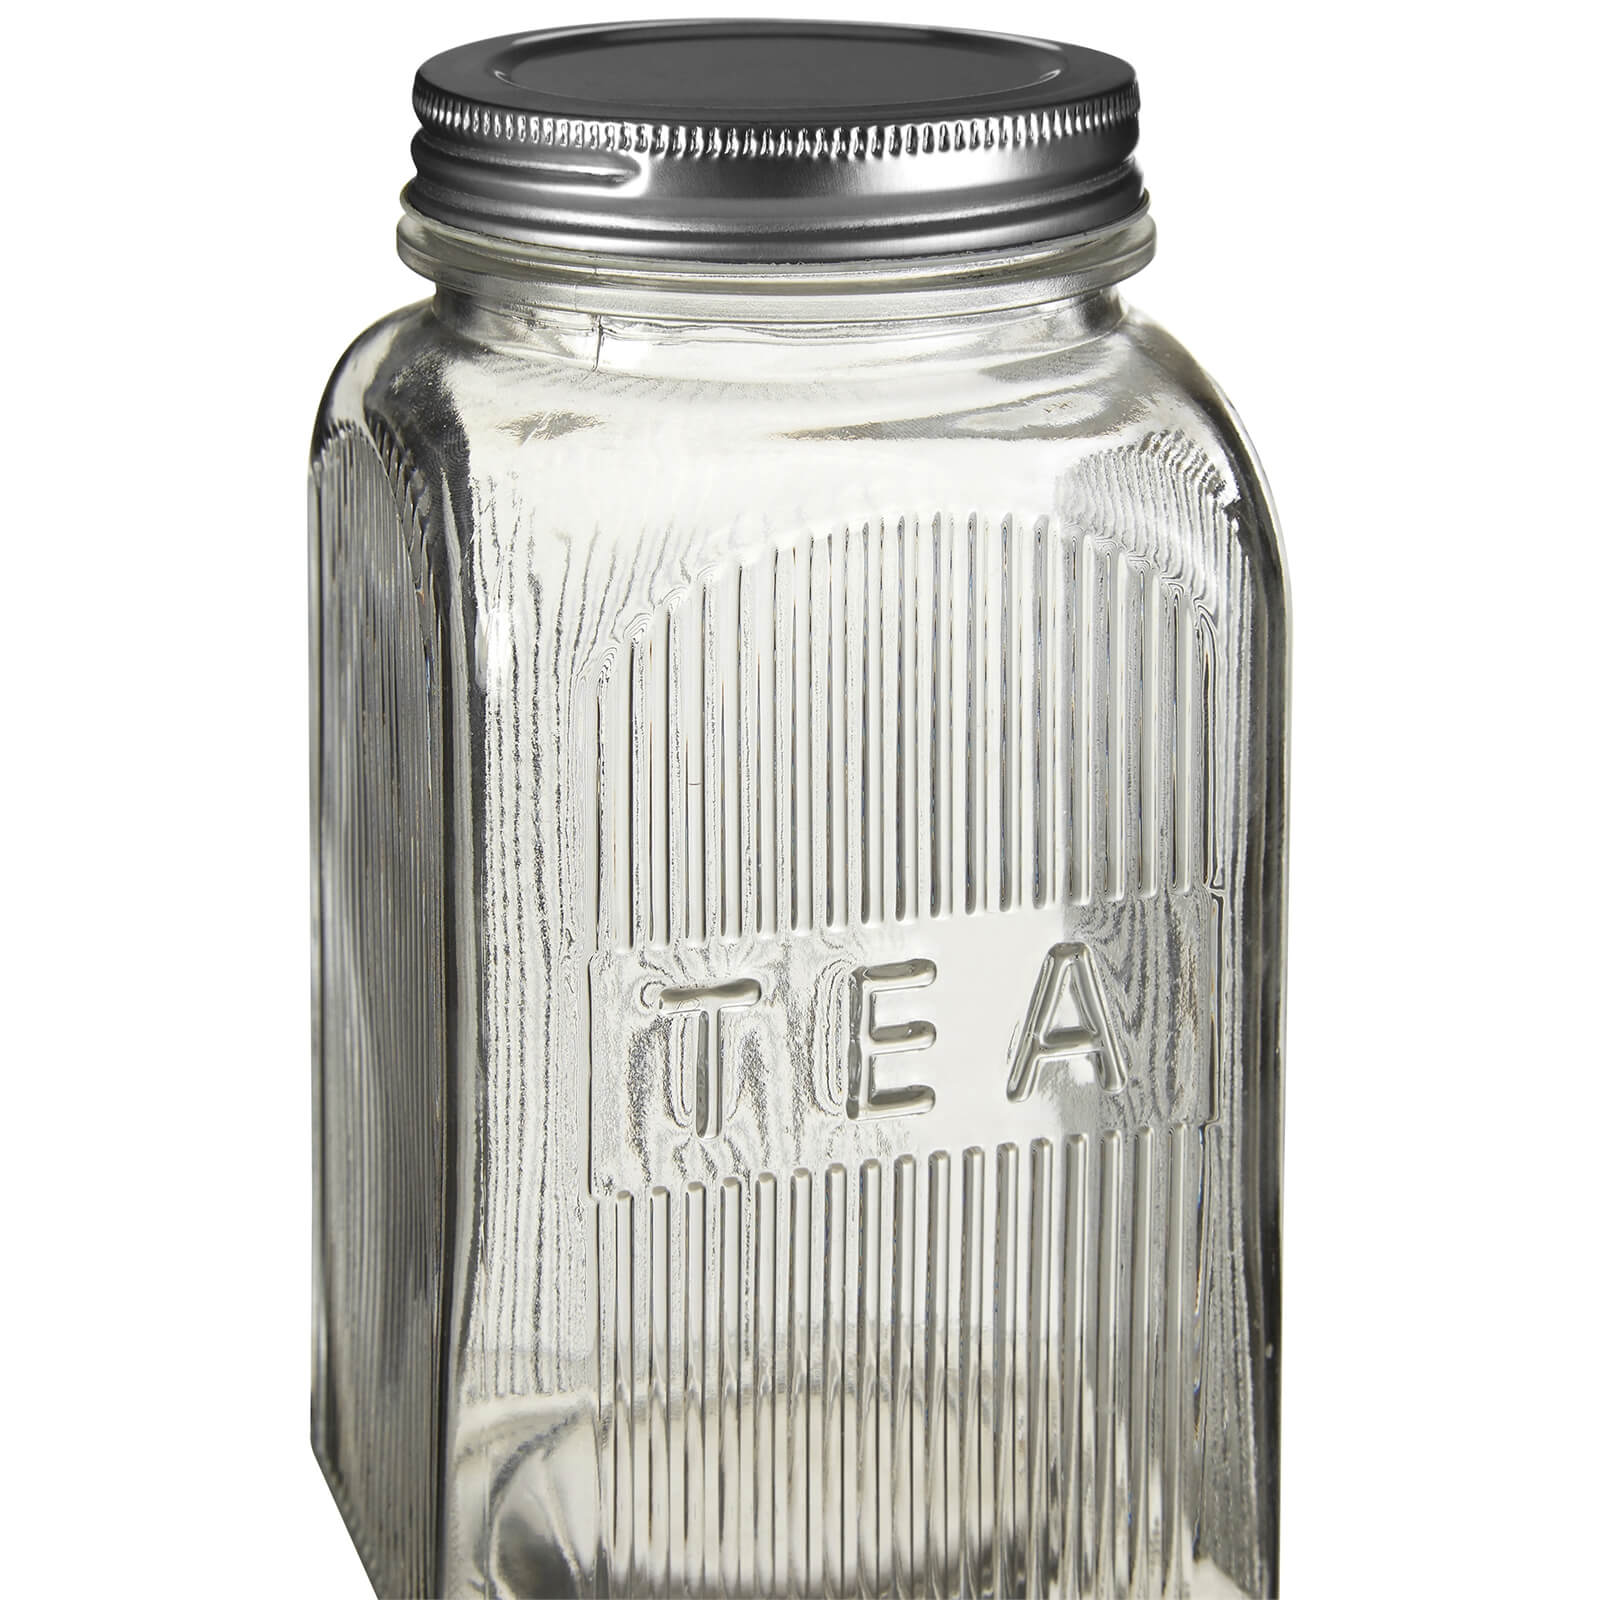 Embossed Glass Jars with Silver Finish Lids